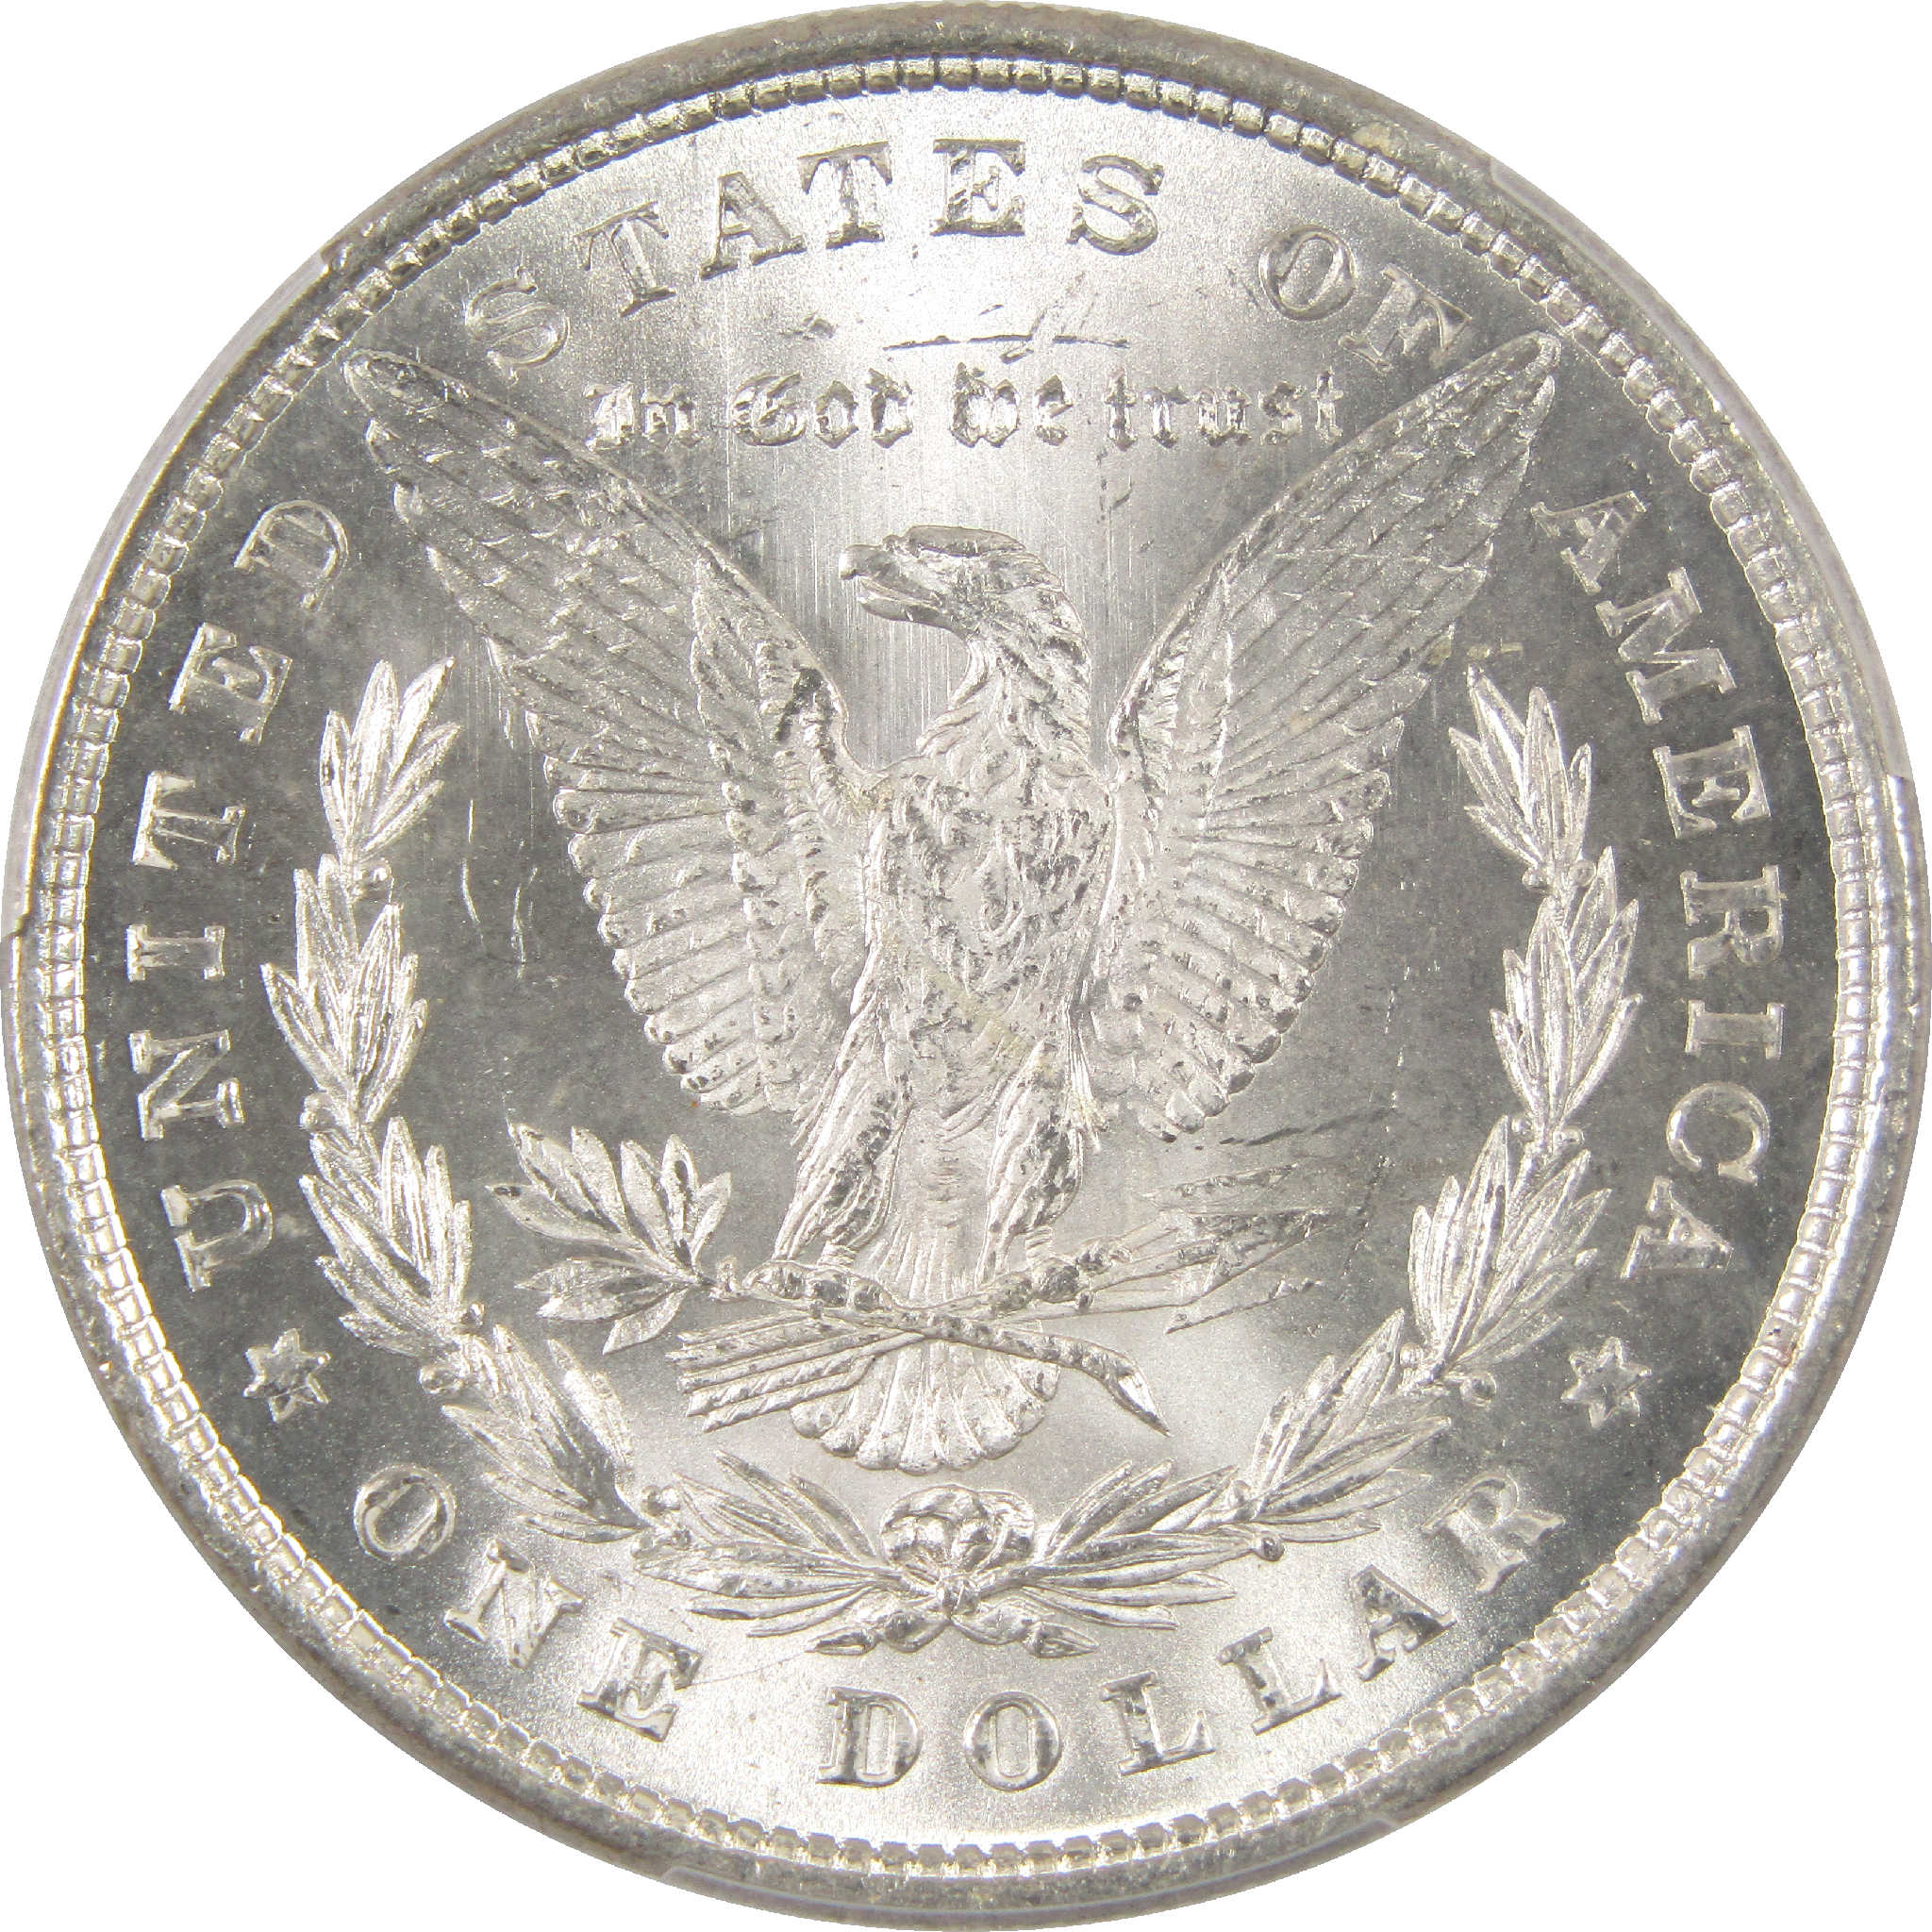 1878 8TF Morgan Dollar MS 62 PCGS Silver $1 Uncirculated SKU:I11338 - Morgan coin - Morgan silver dollar - Morgan silver dollar for sale - Profile Coins &amp; Collectibles